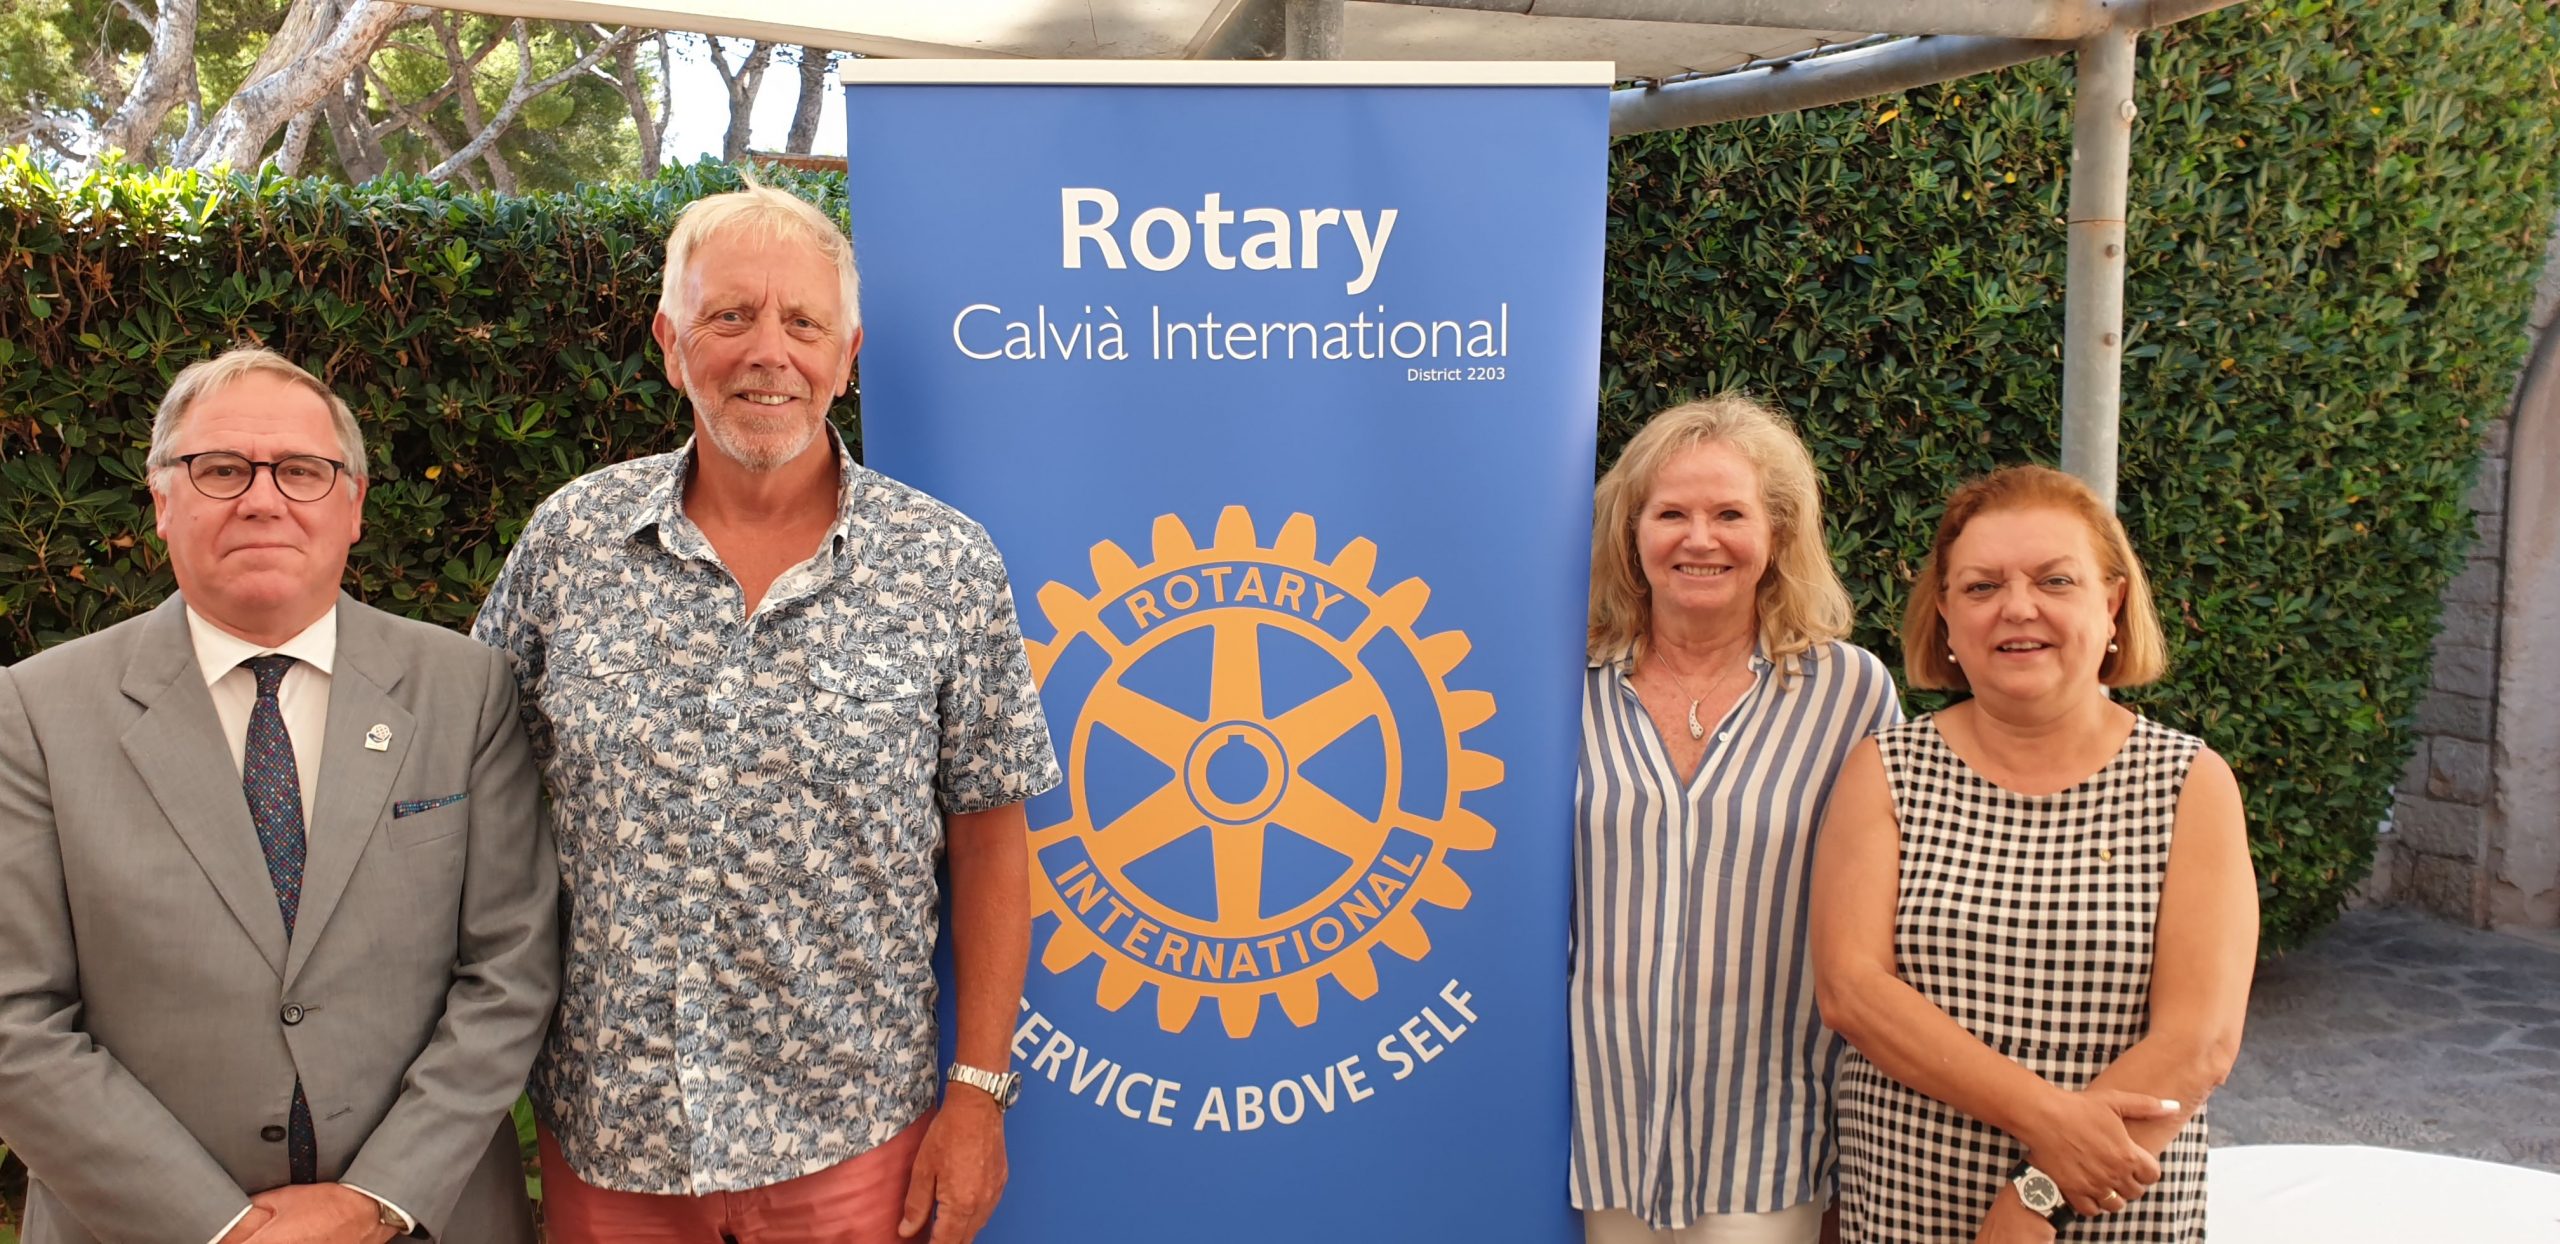 On Monday 6th June Rotary club Calvia International received a visit from the District 2203 Governor Javier Ygarza, and Assistant Governor Armando Pomar￼